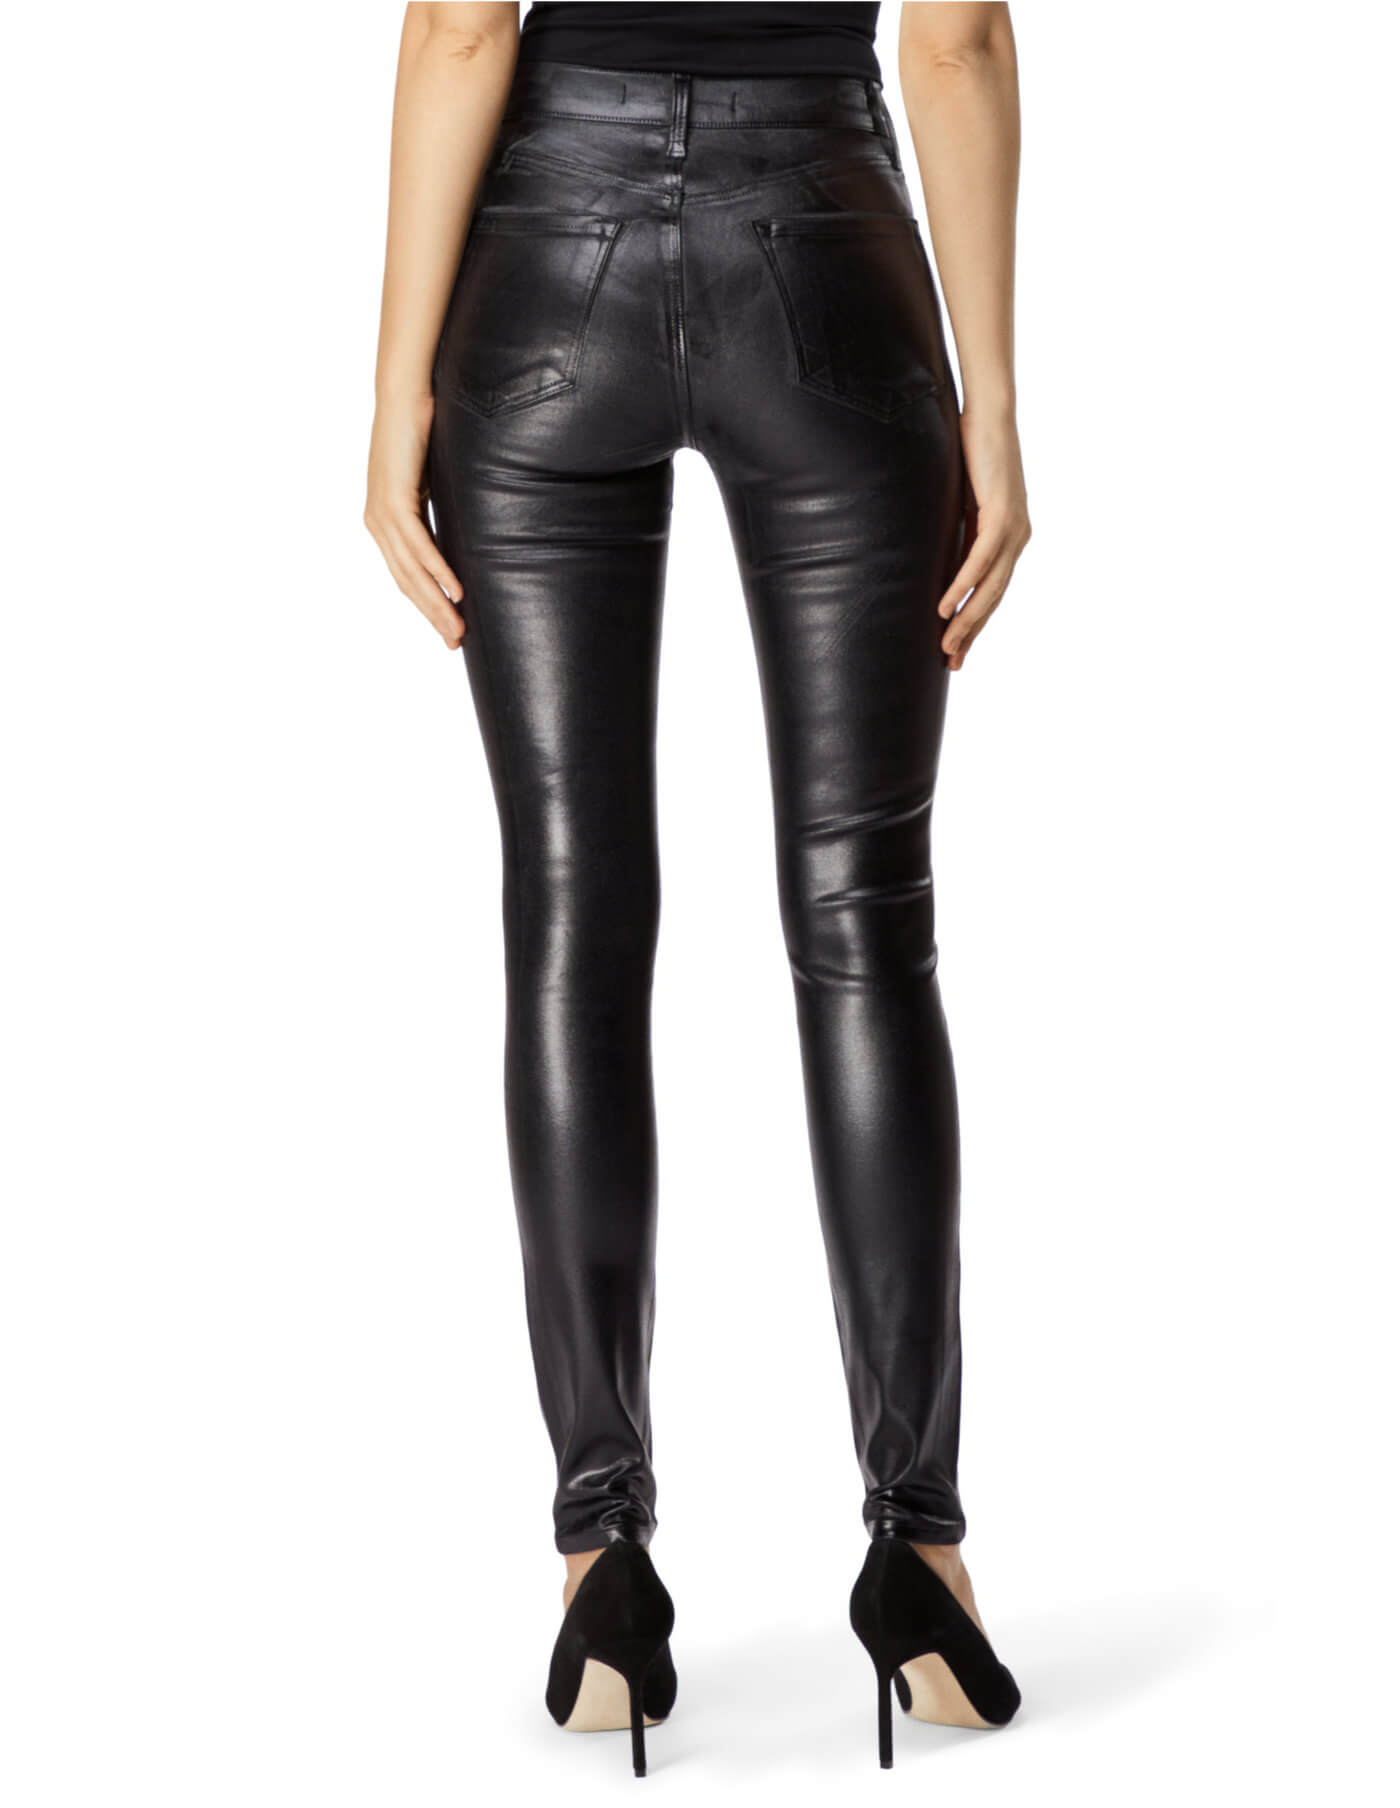 J BRAND Maria High Rise Jeans In Galactic Black at Storm Fashion